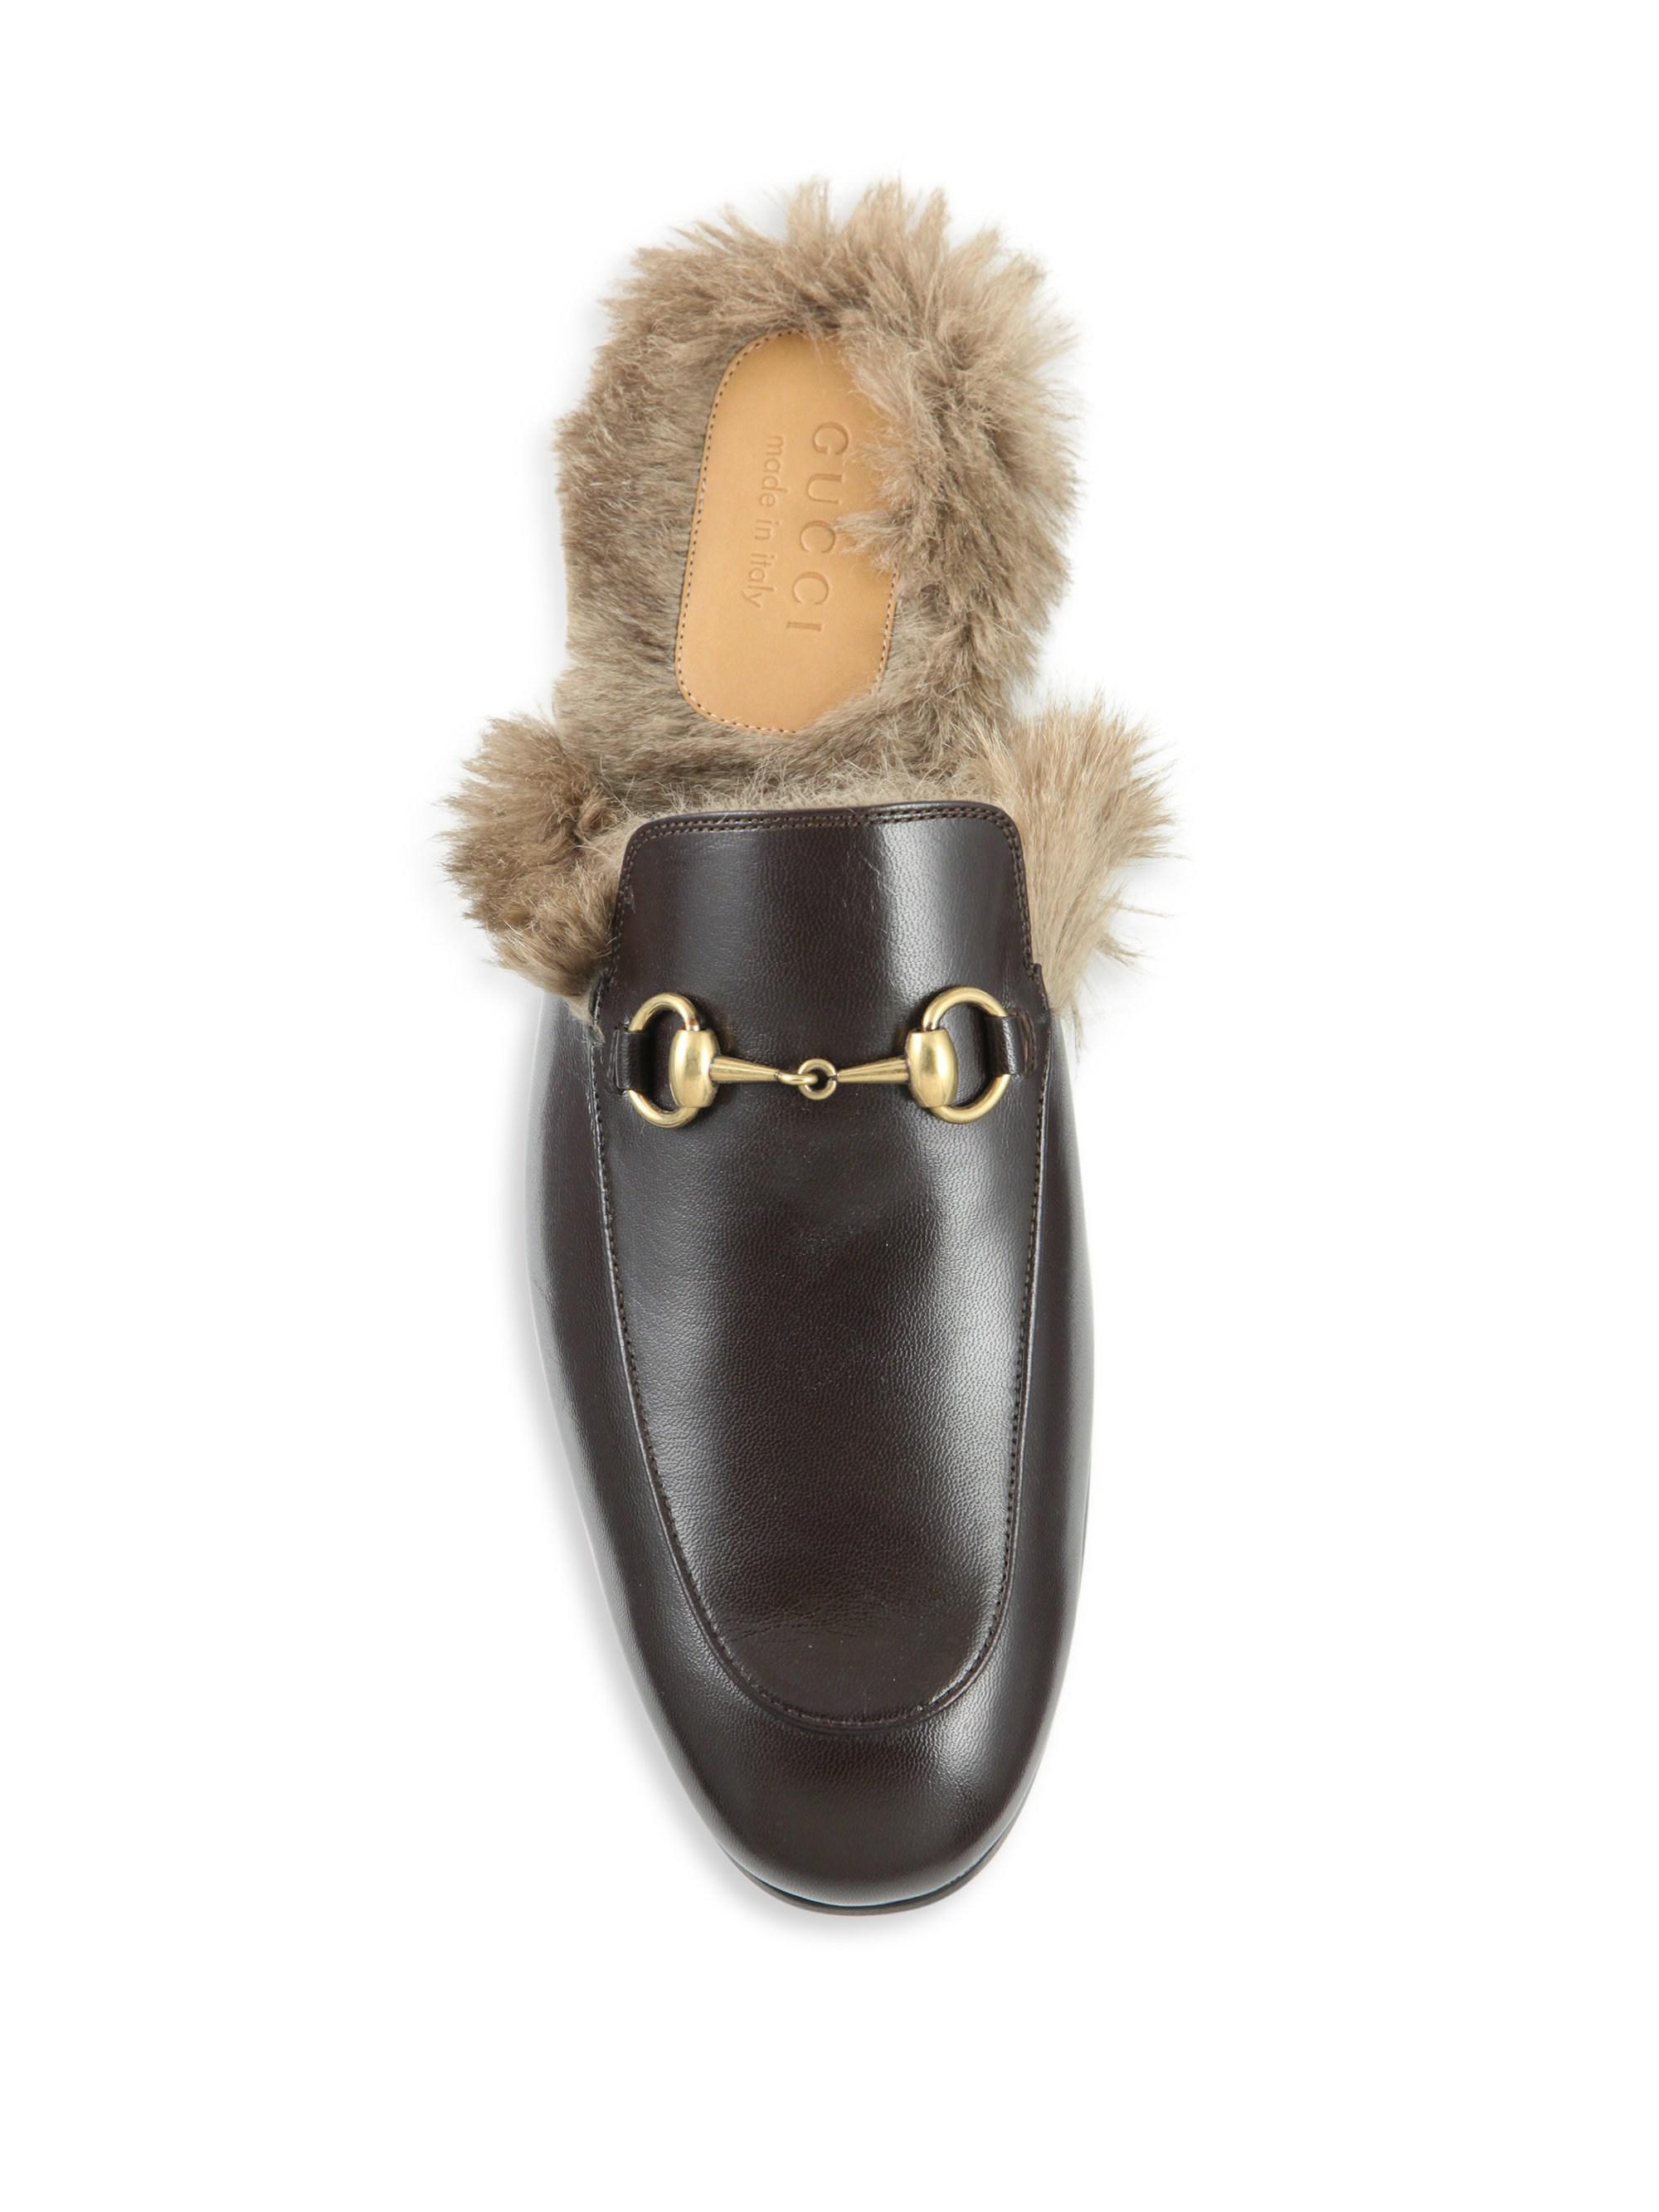 Gucci Princetown Fur-lined Leather Slippers for Men - Lyst